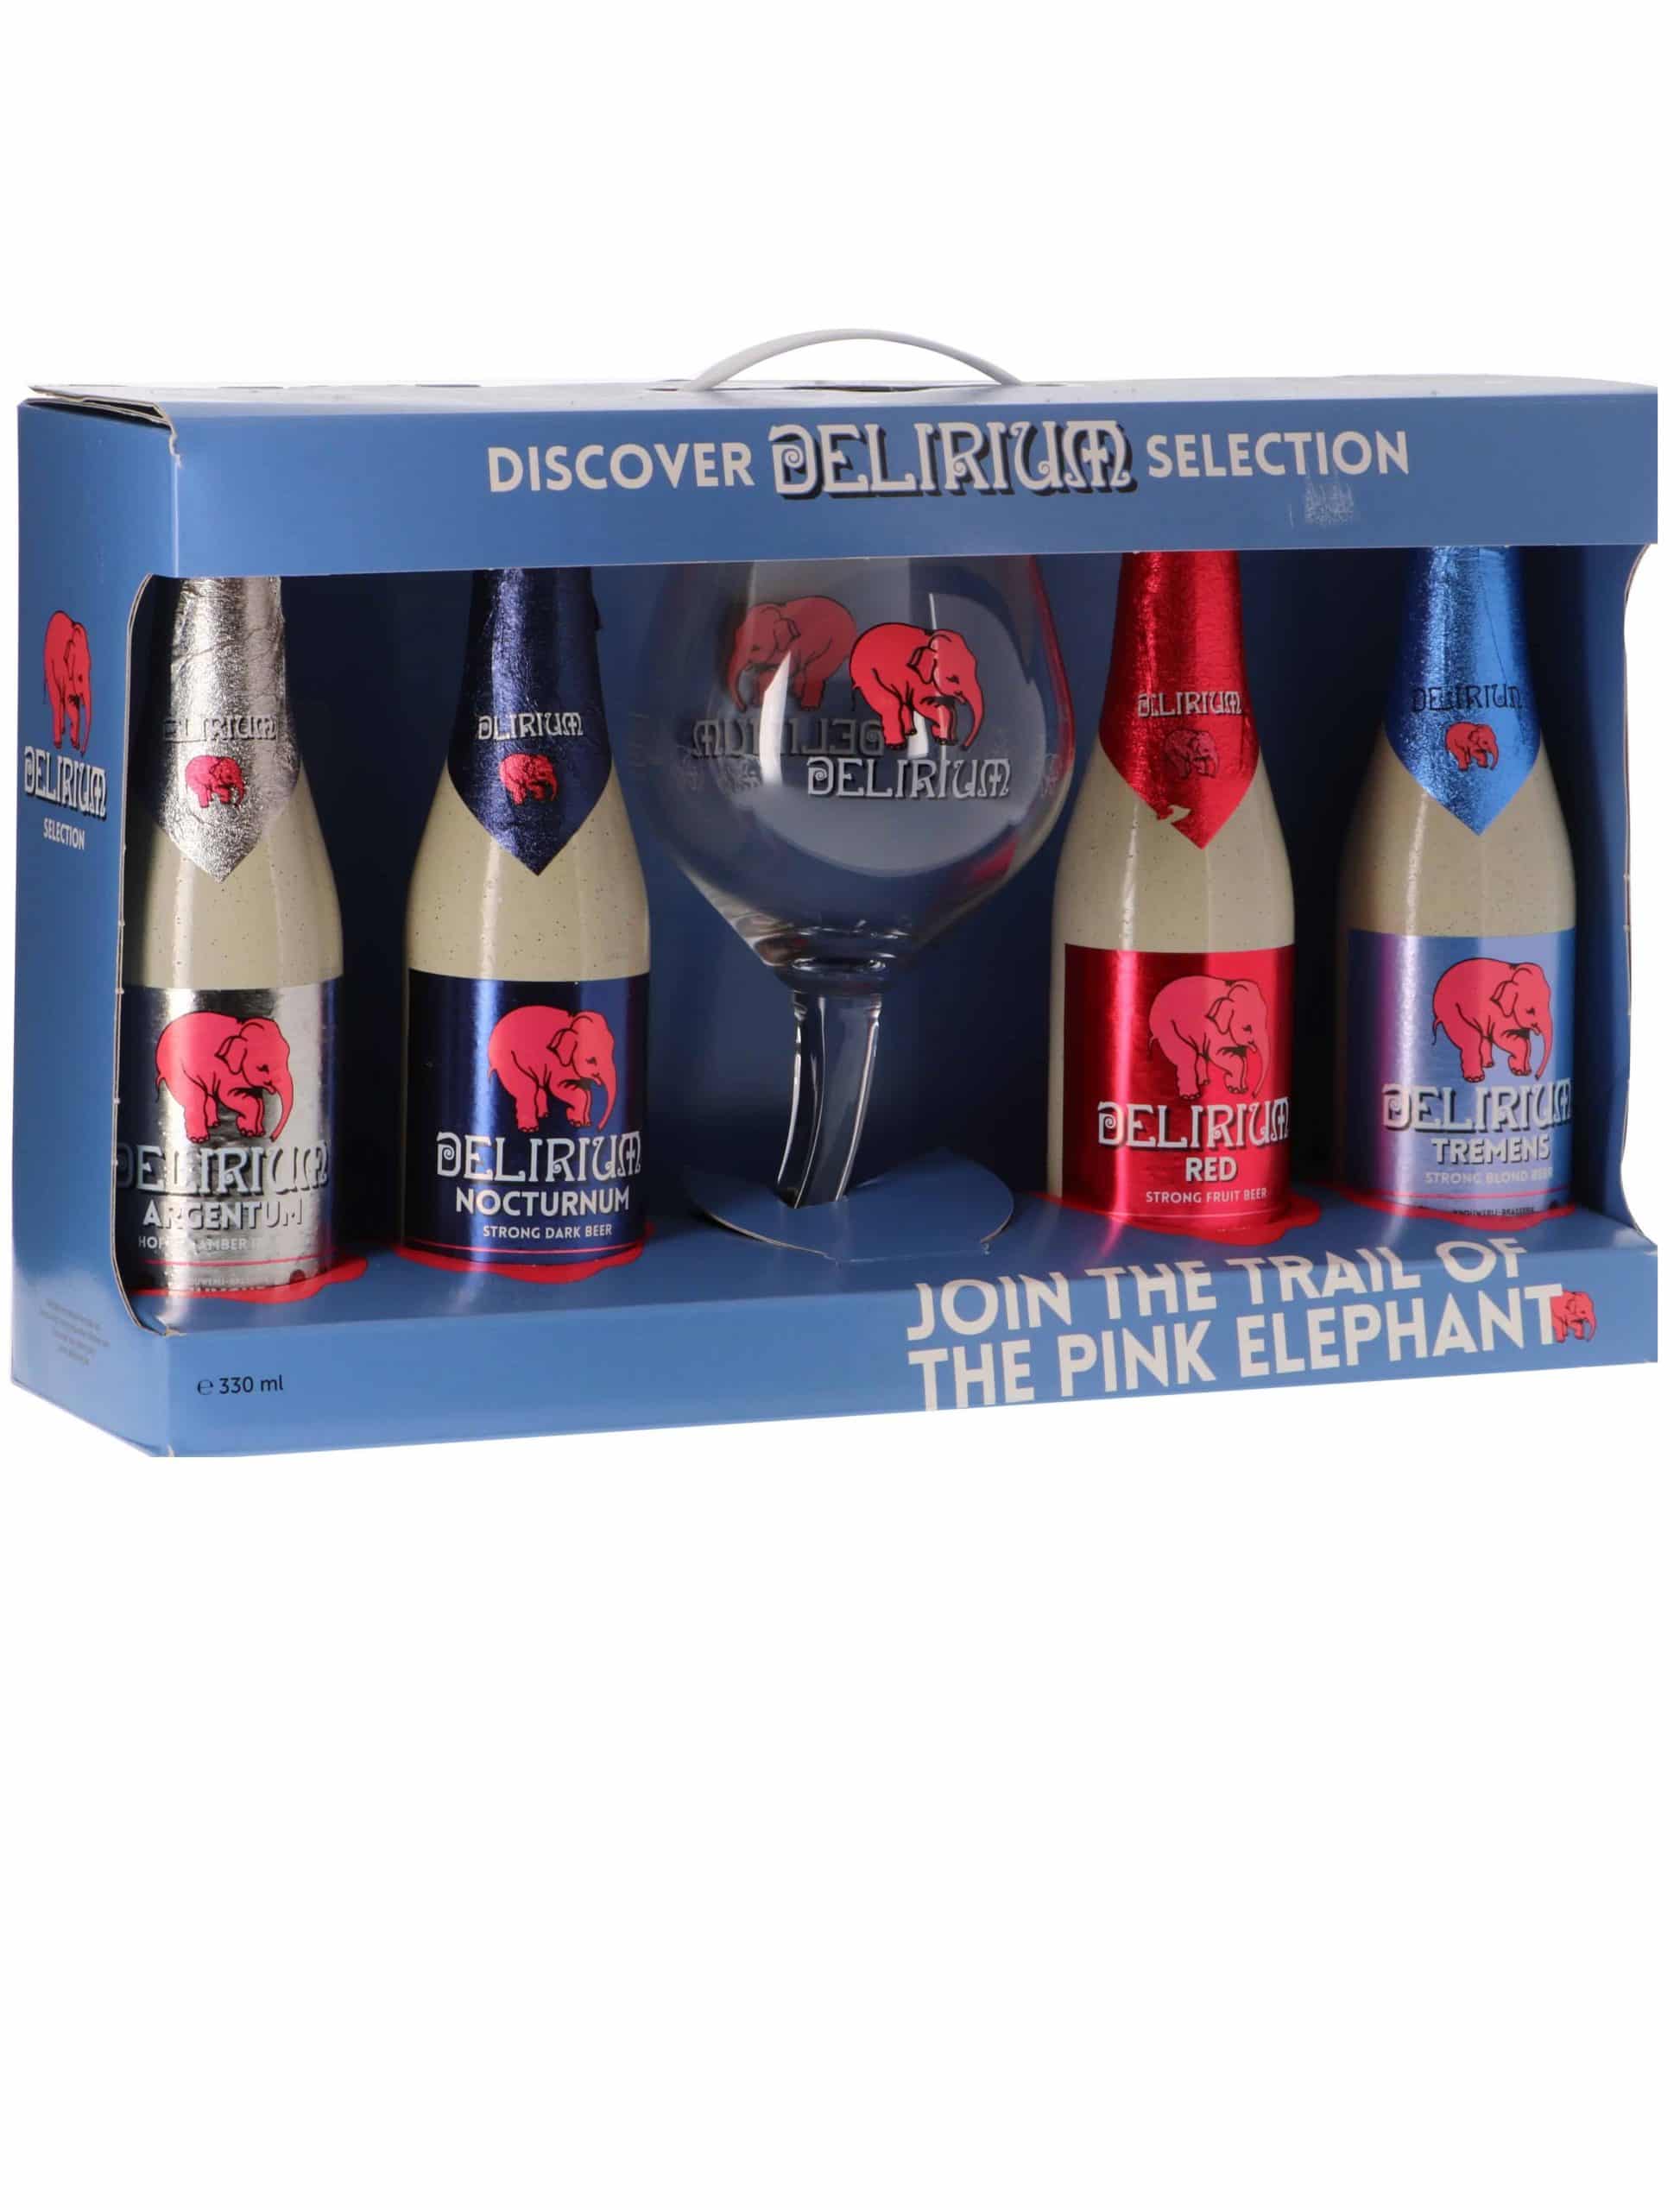 View Delirium Discovery Gift Pack information